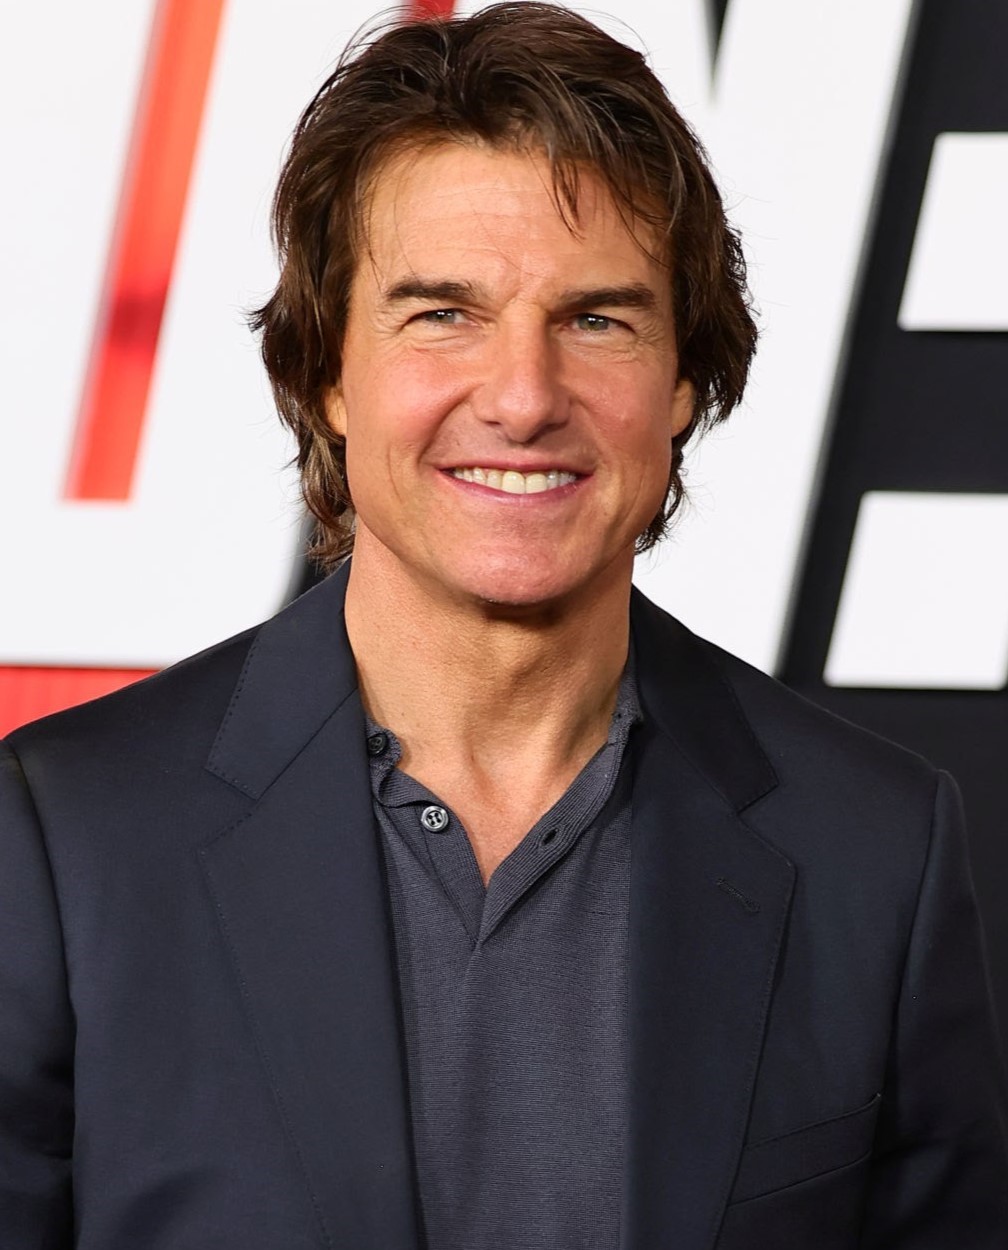 https://static.wikia.nocookie.net/missionimpossible/images/6/63/Tom-cruise-2023.jpg/revision/latest?cb=20230829225643